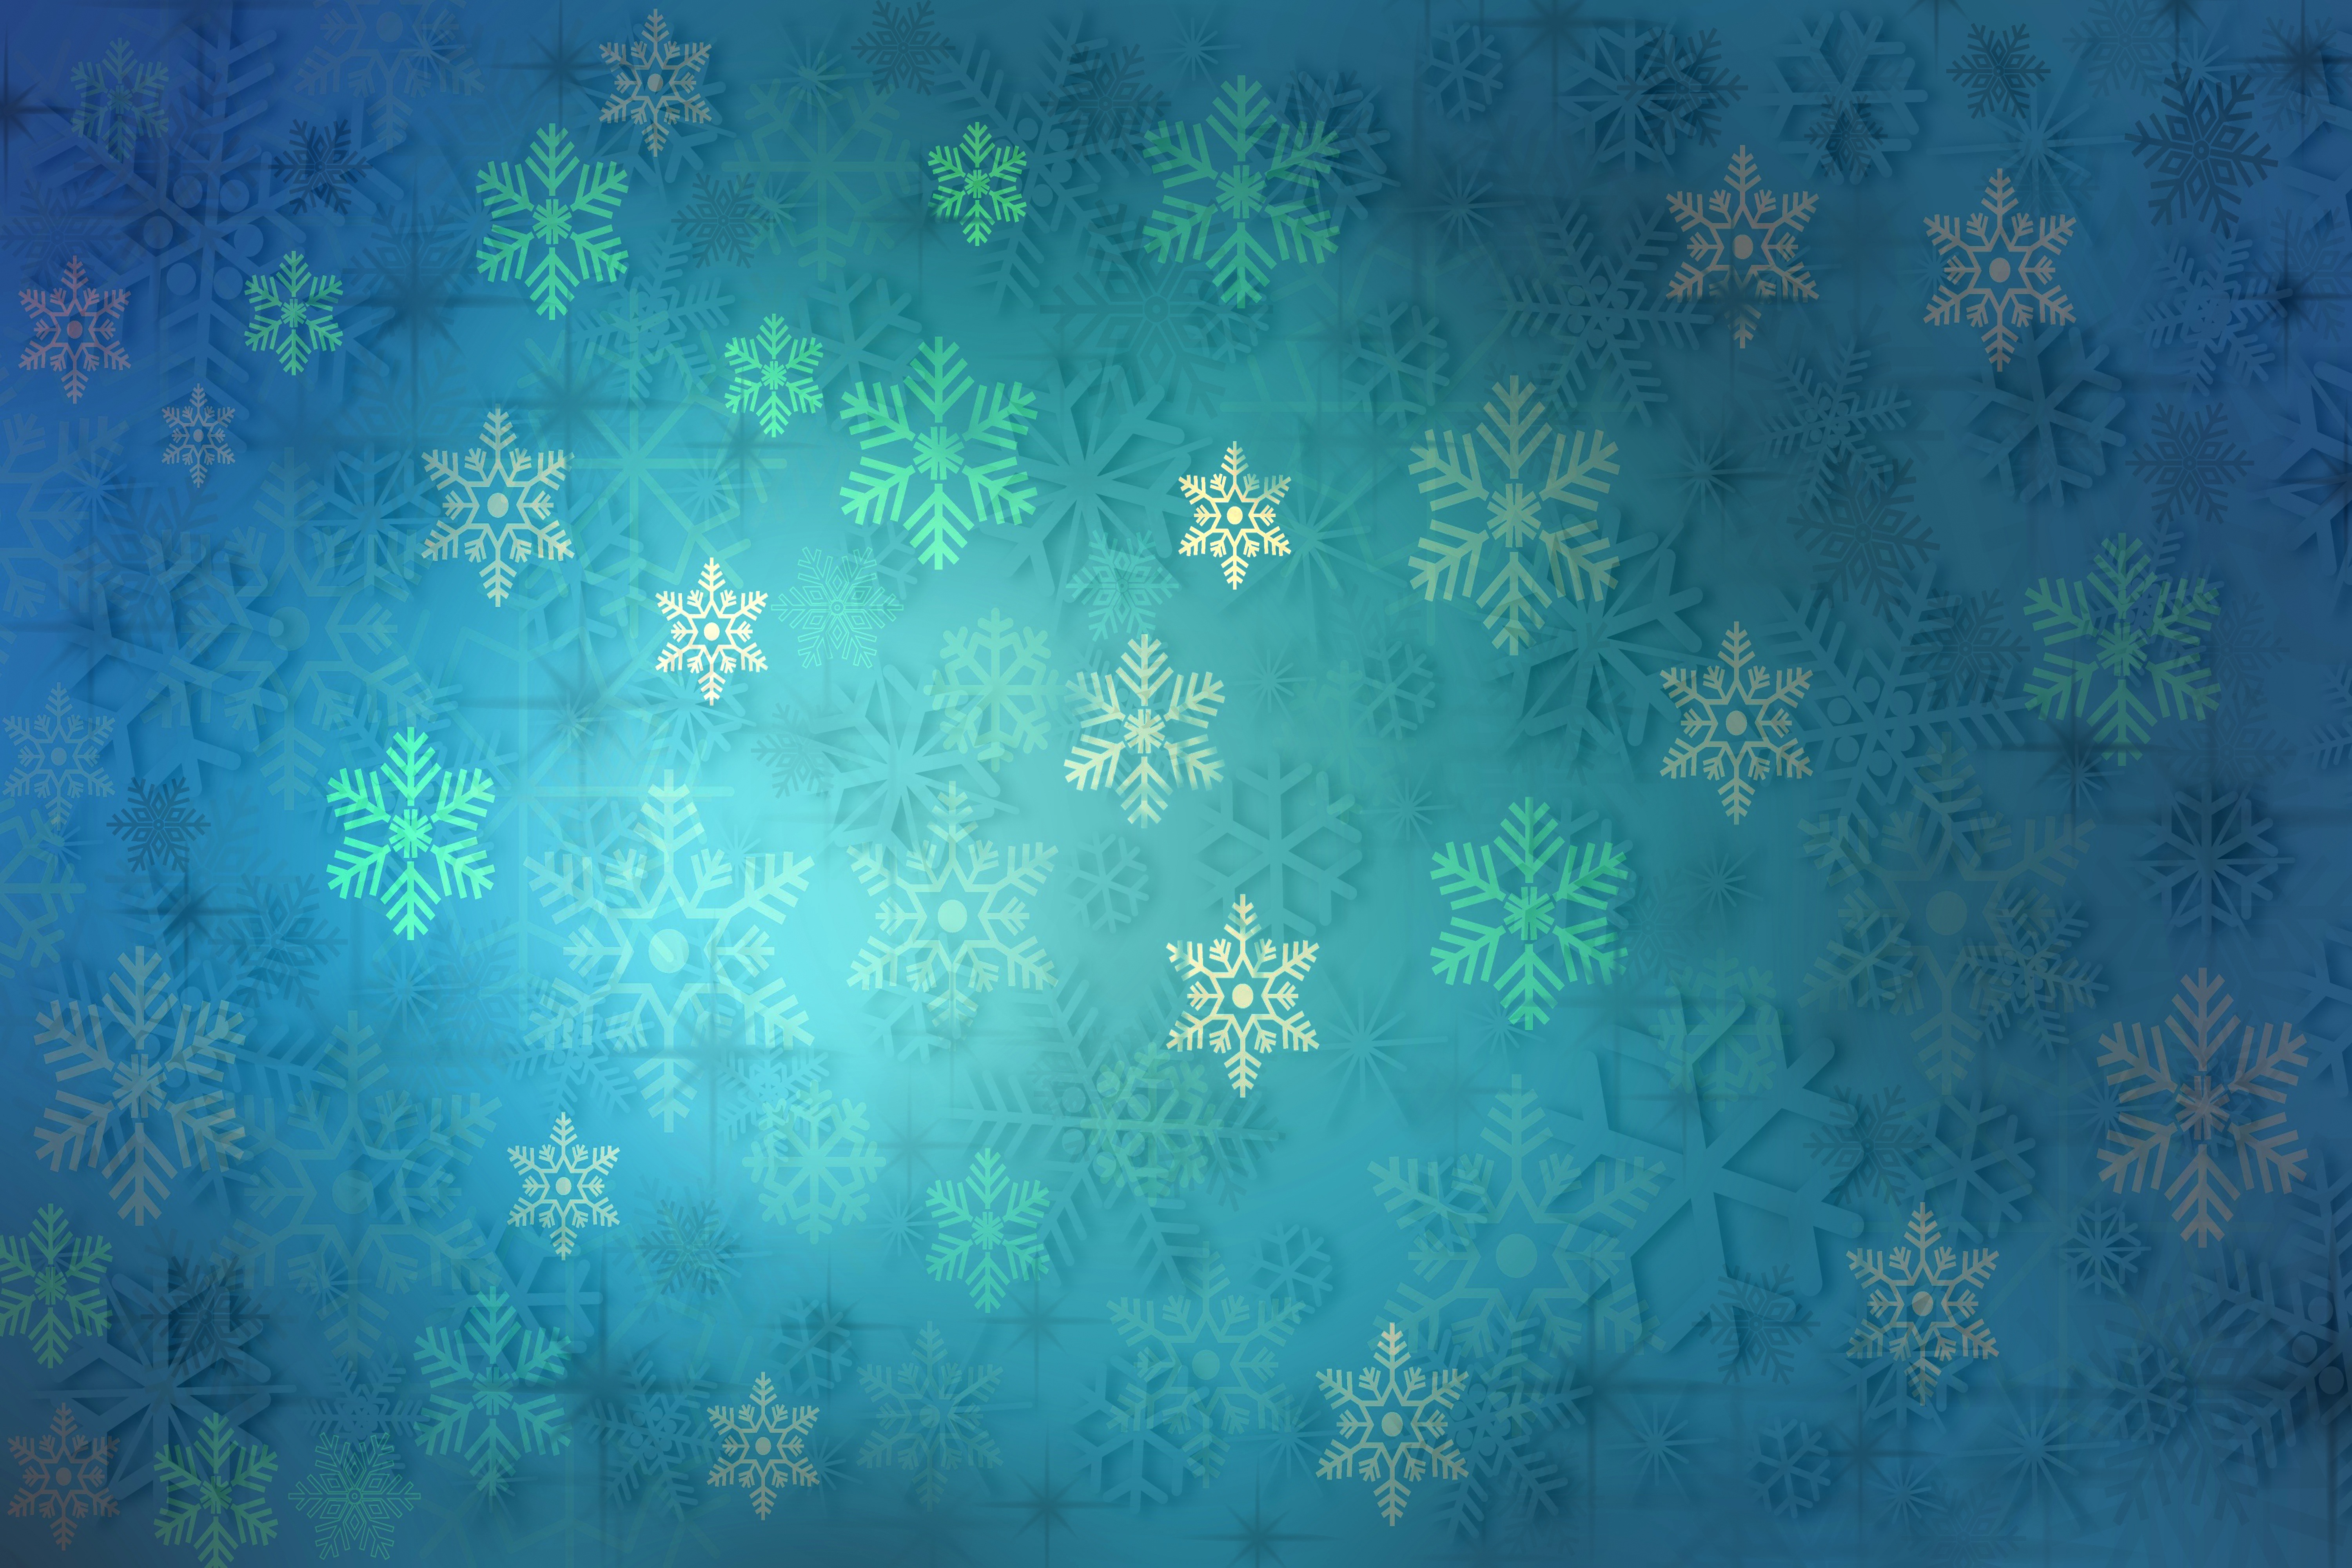 pattern, snowflakes, texture, new year, textures, christmas, blue, holiday cellphone